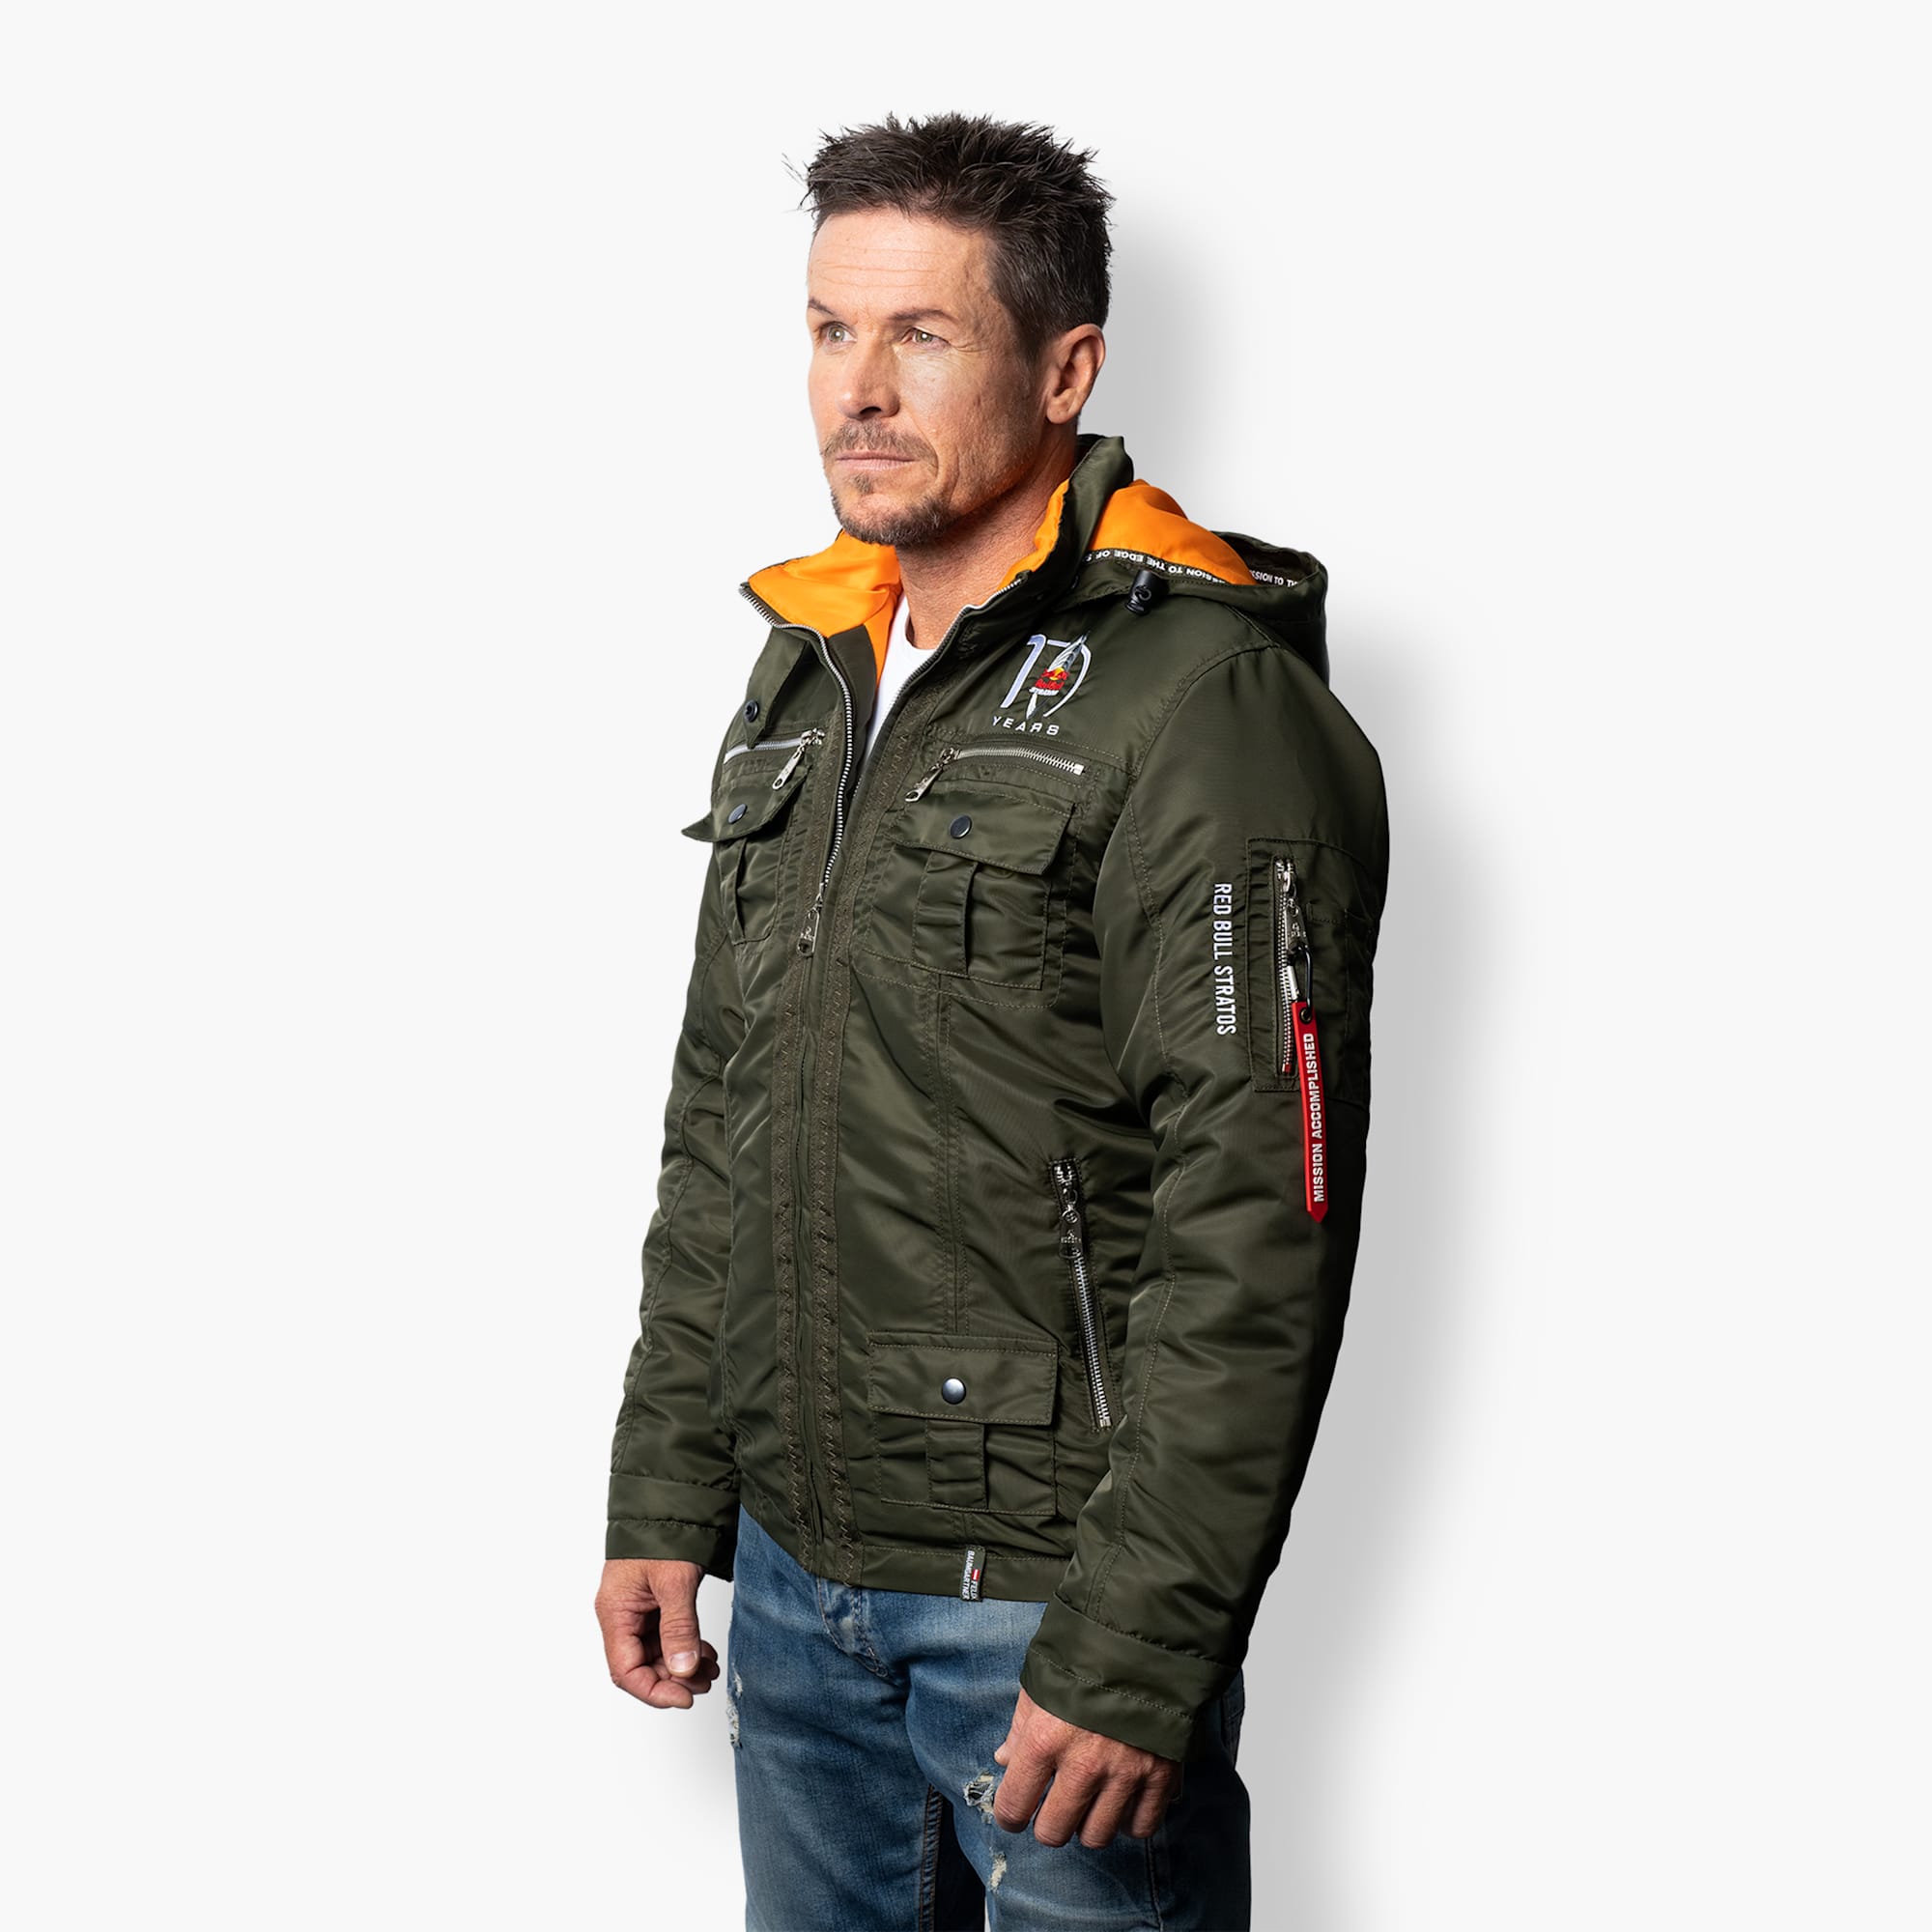 Red Bull Stratos Shop: Red Bull Stratos 10 Year Pilot Jacket | only ...